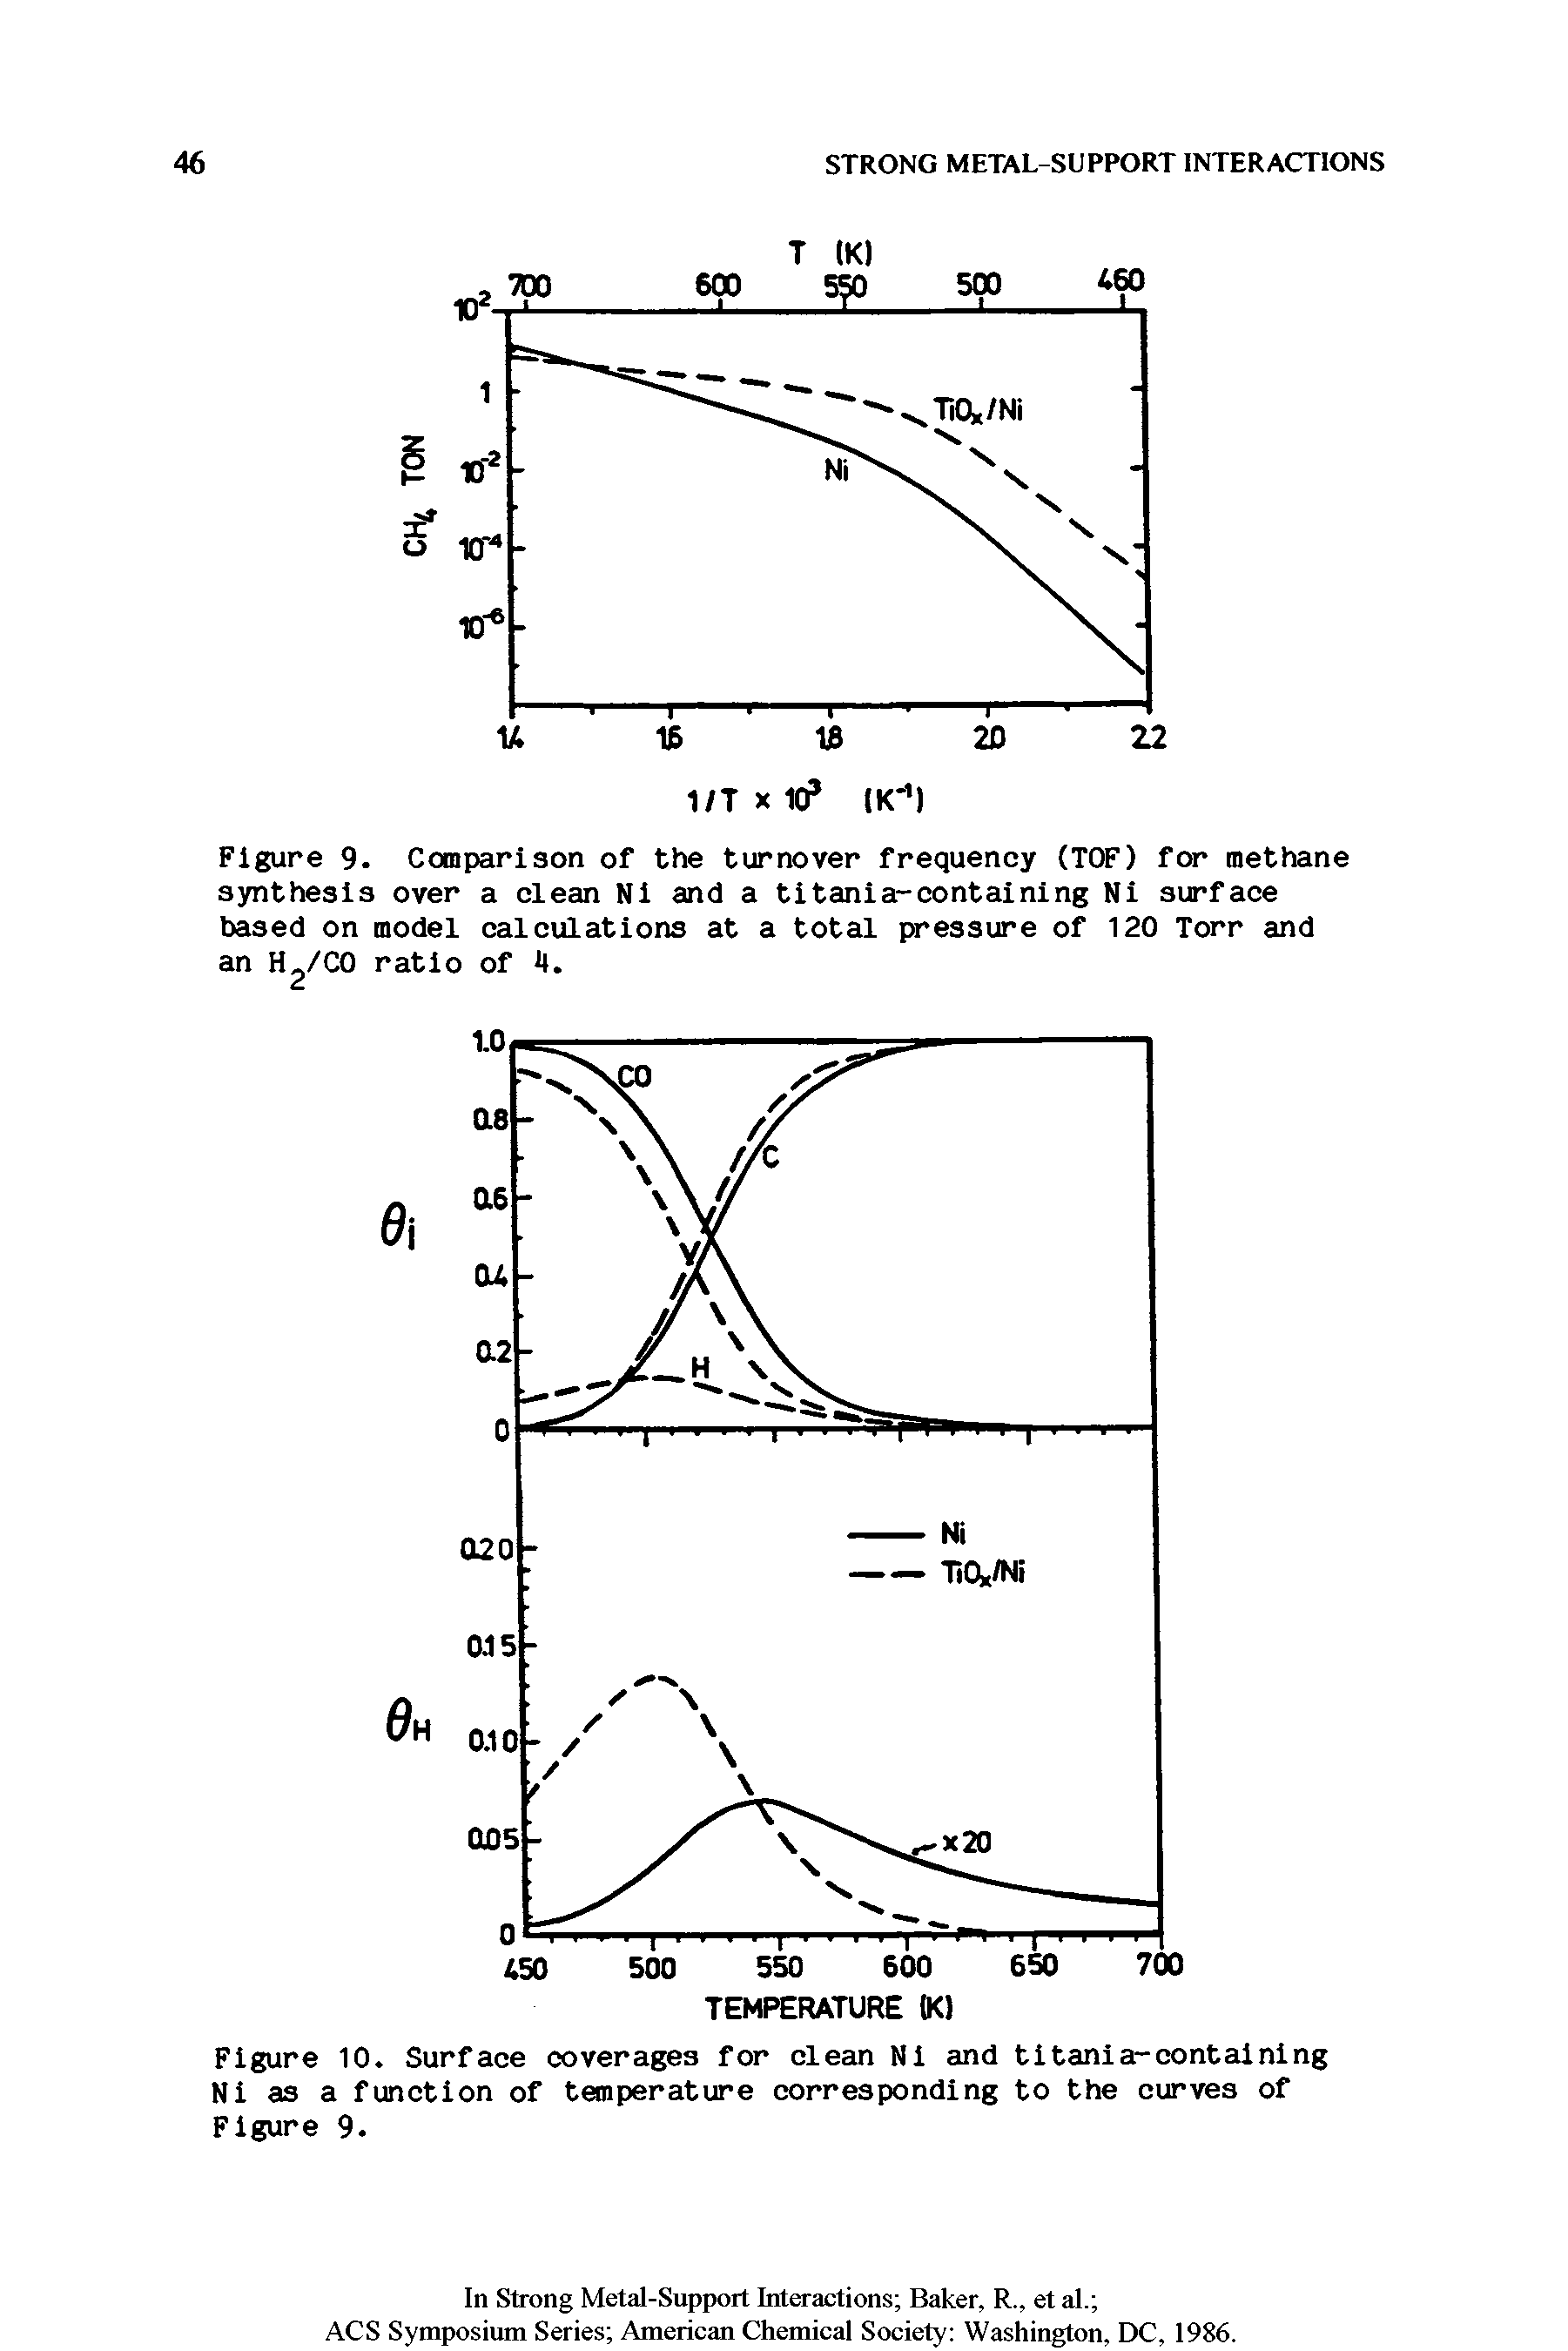 Figure 9. Comparison of the turnover frequency (TOF) for methane synthesis over a clean Ni and a titania-containing Ni surface based on model calculations at a total pressure of 120 Torr and an H /CO ratio of 4.